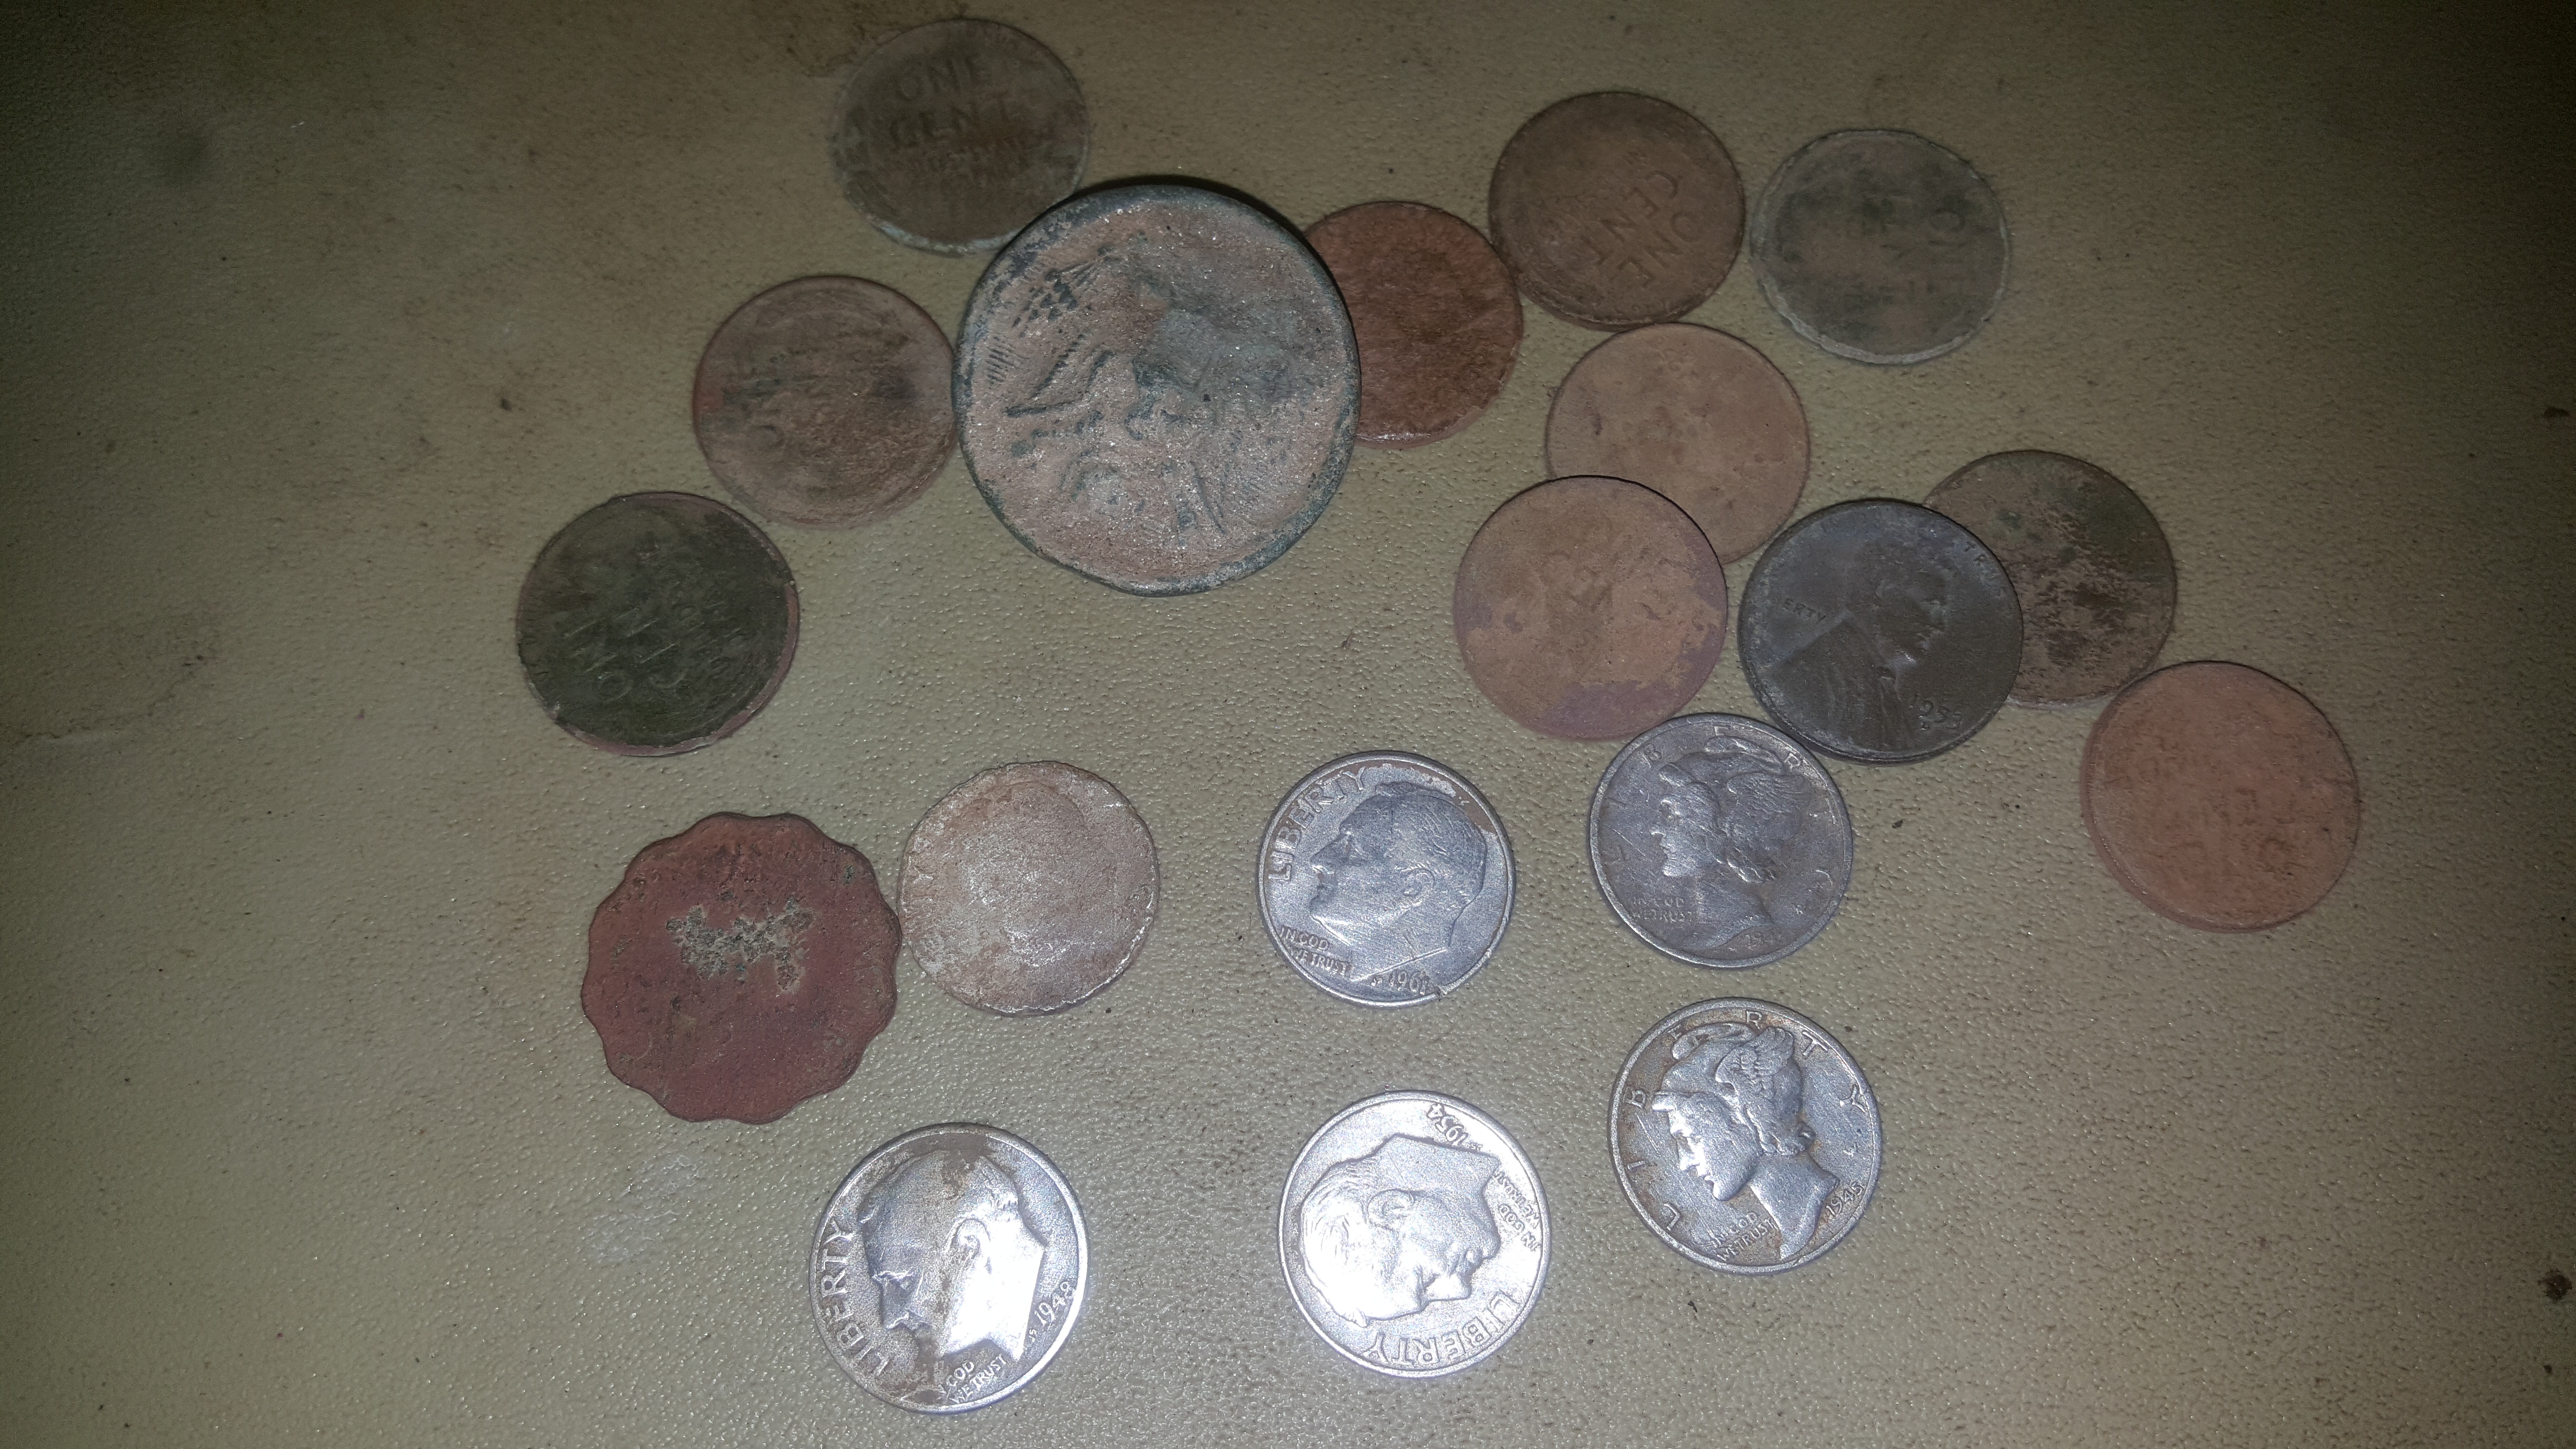 Metal detecting finds from North GA in 2019